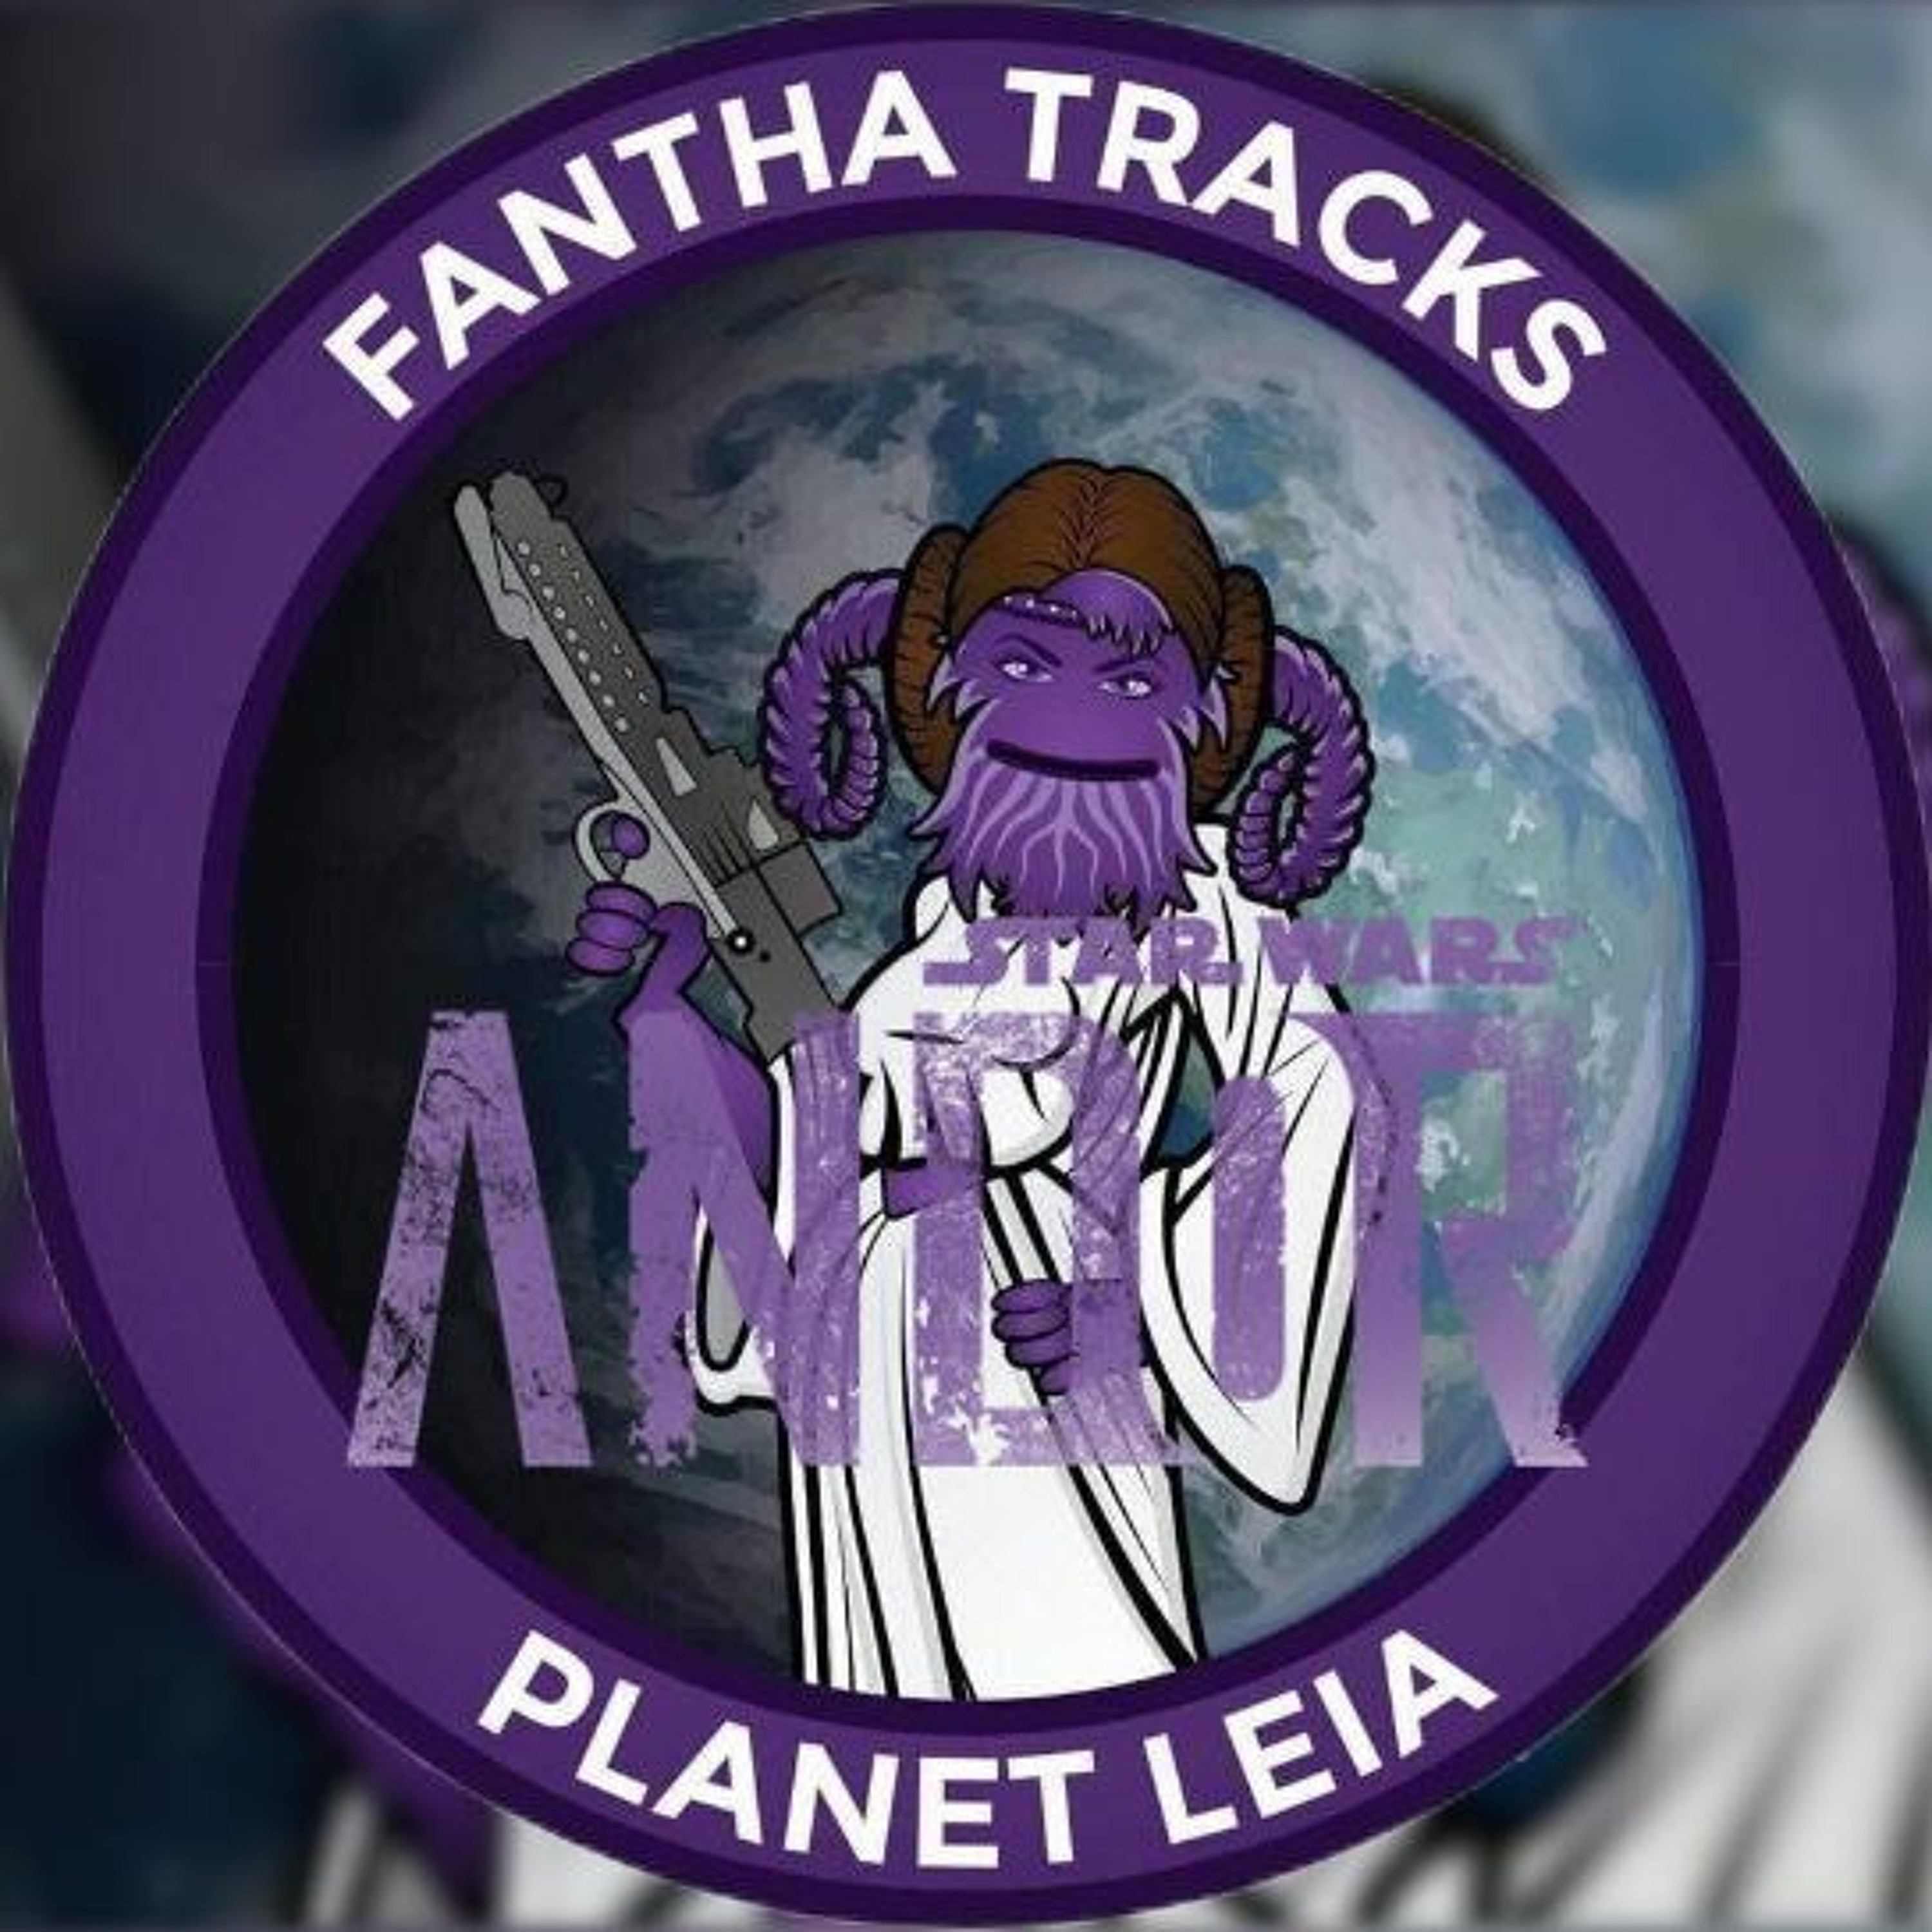 Planet Leia Episode 12: They ARE the senate